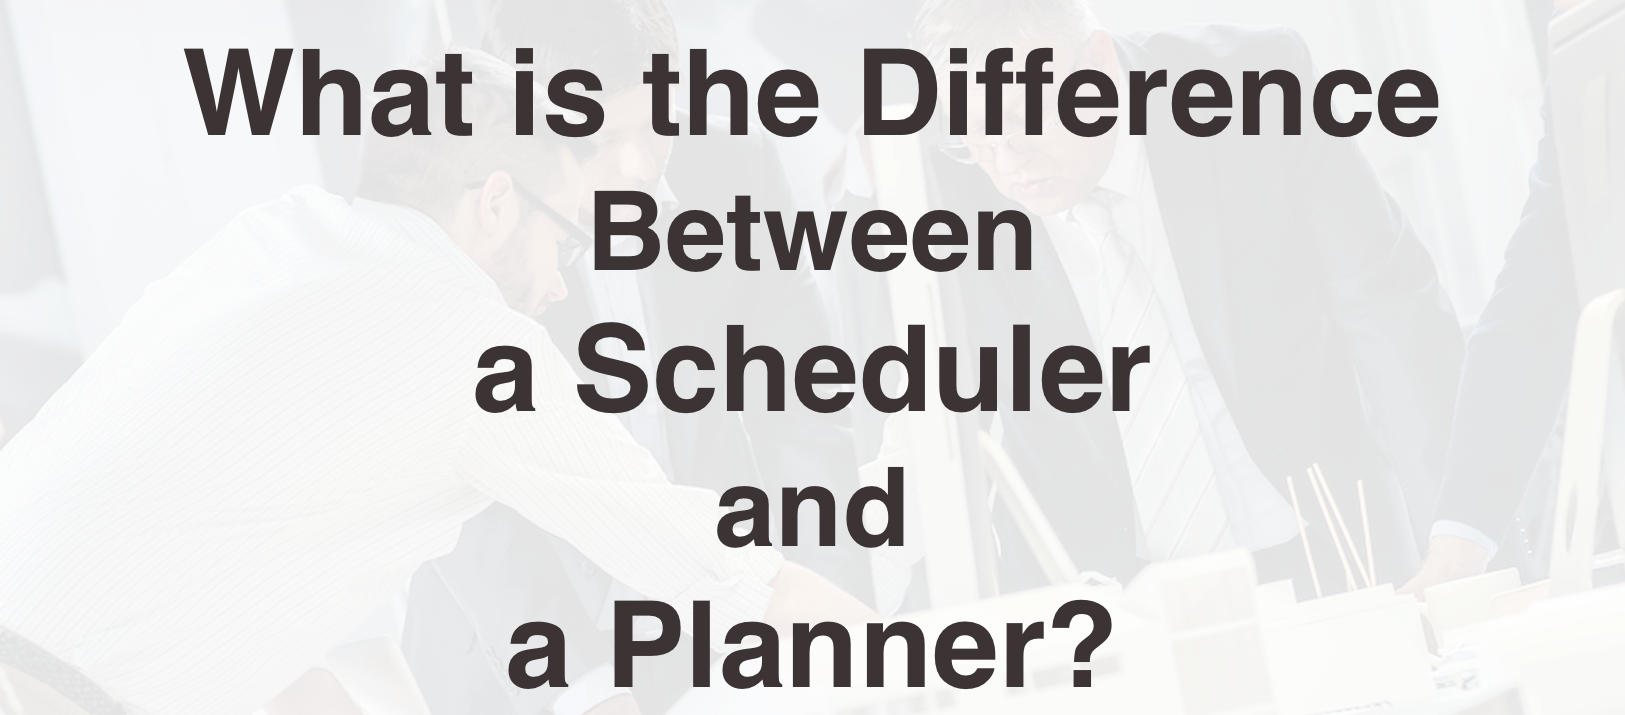 Difference Between a Scheduler and a Planner